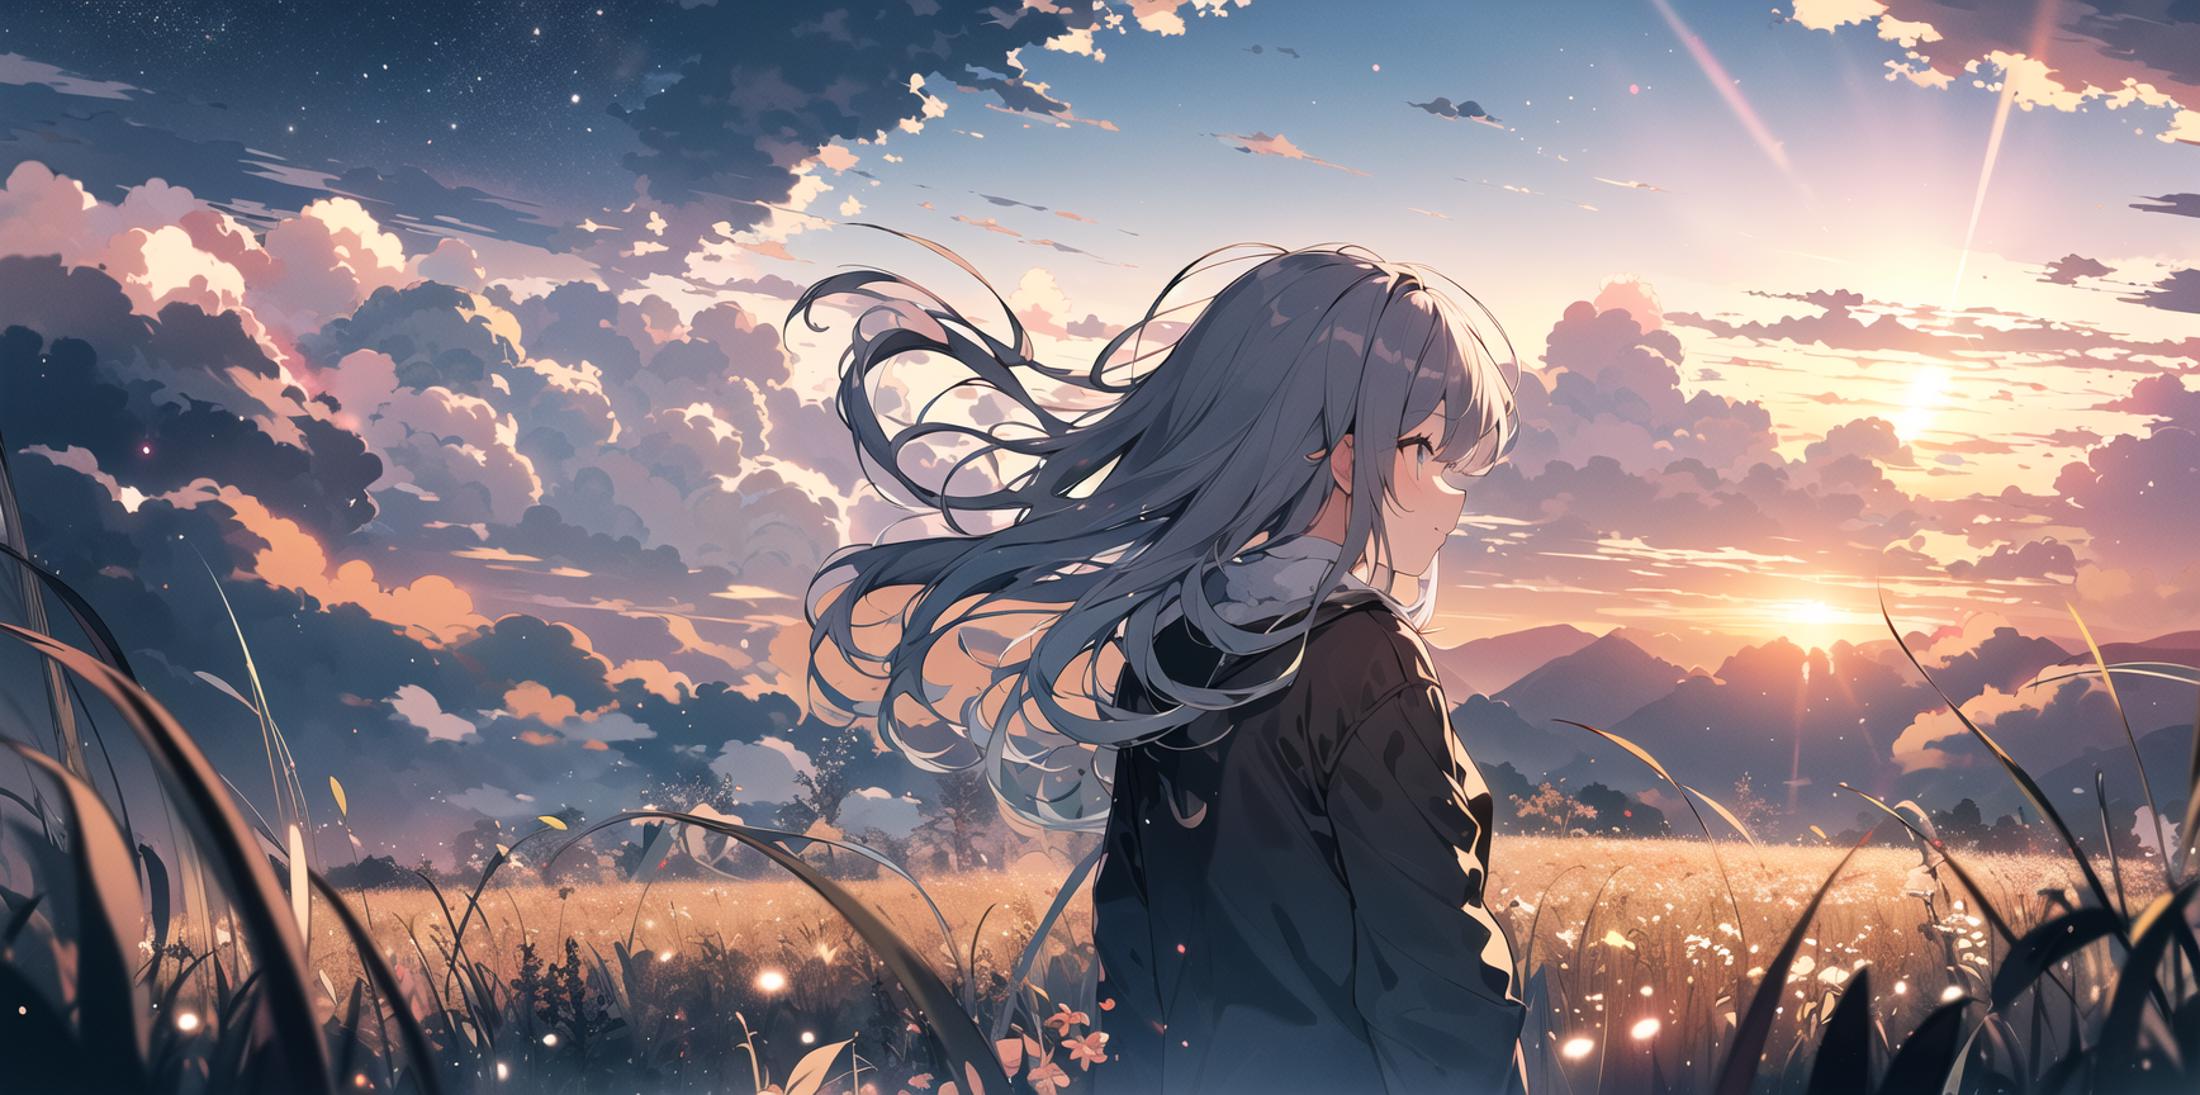 Woman with Long Hair and a Black Jacket Standing in a Field at Sunset